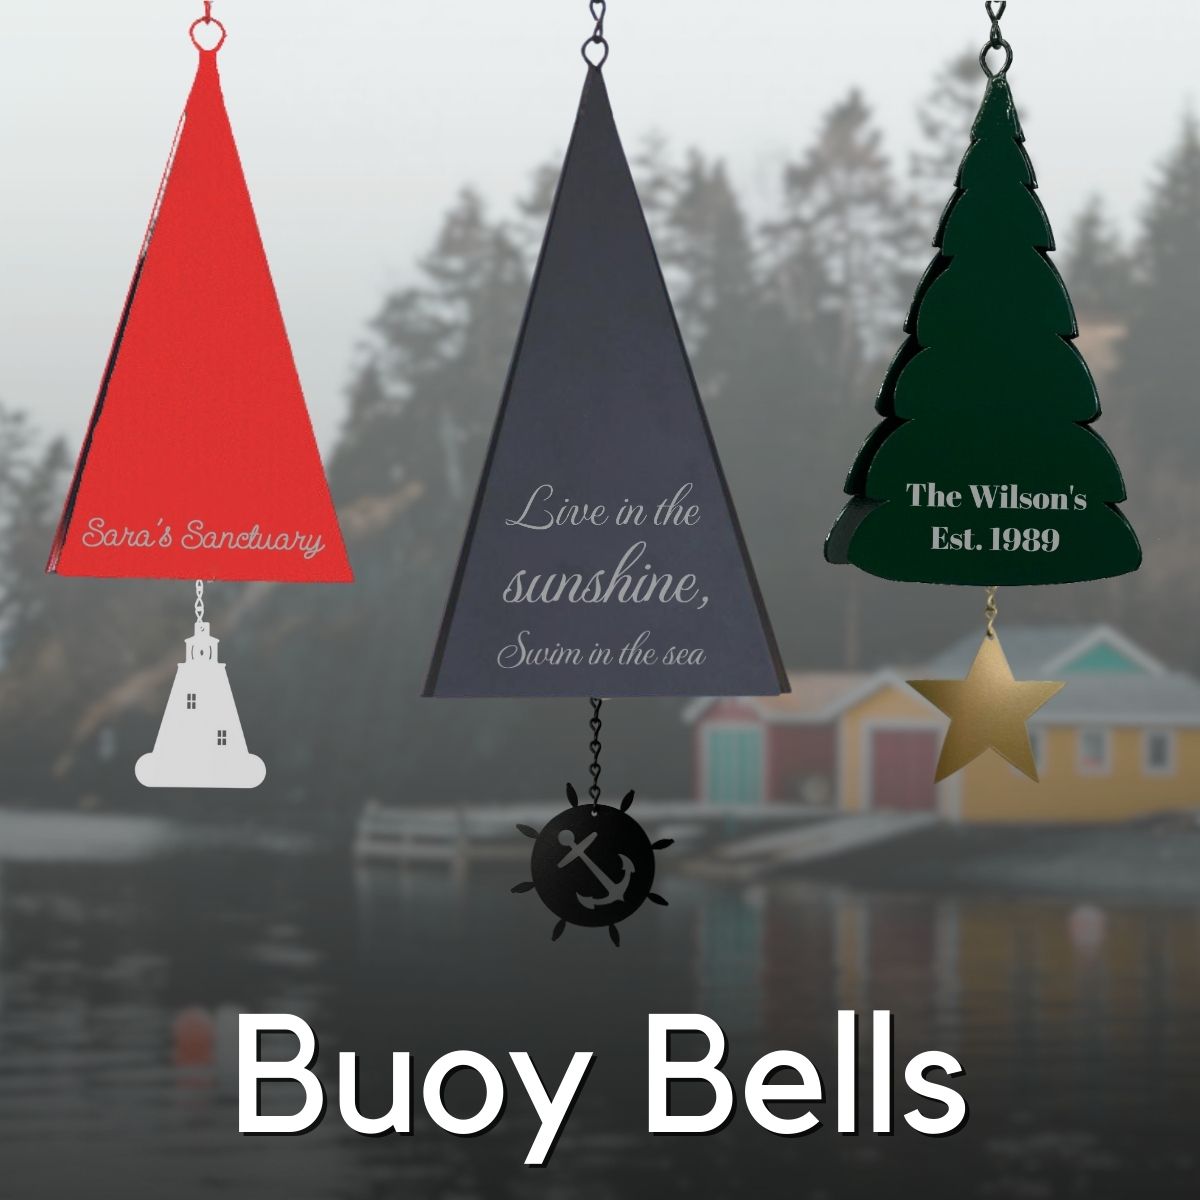 Authentic Maine-Made Buoy Bells | Wind Bells Made in The USA